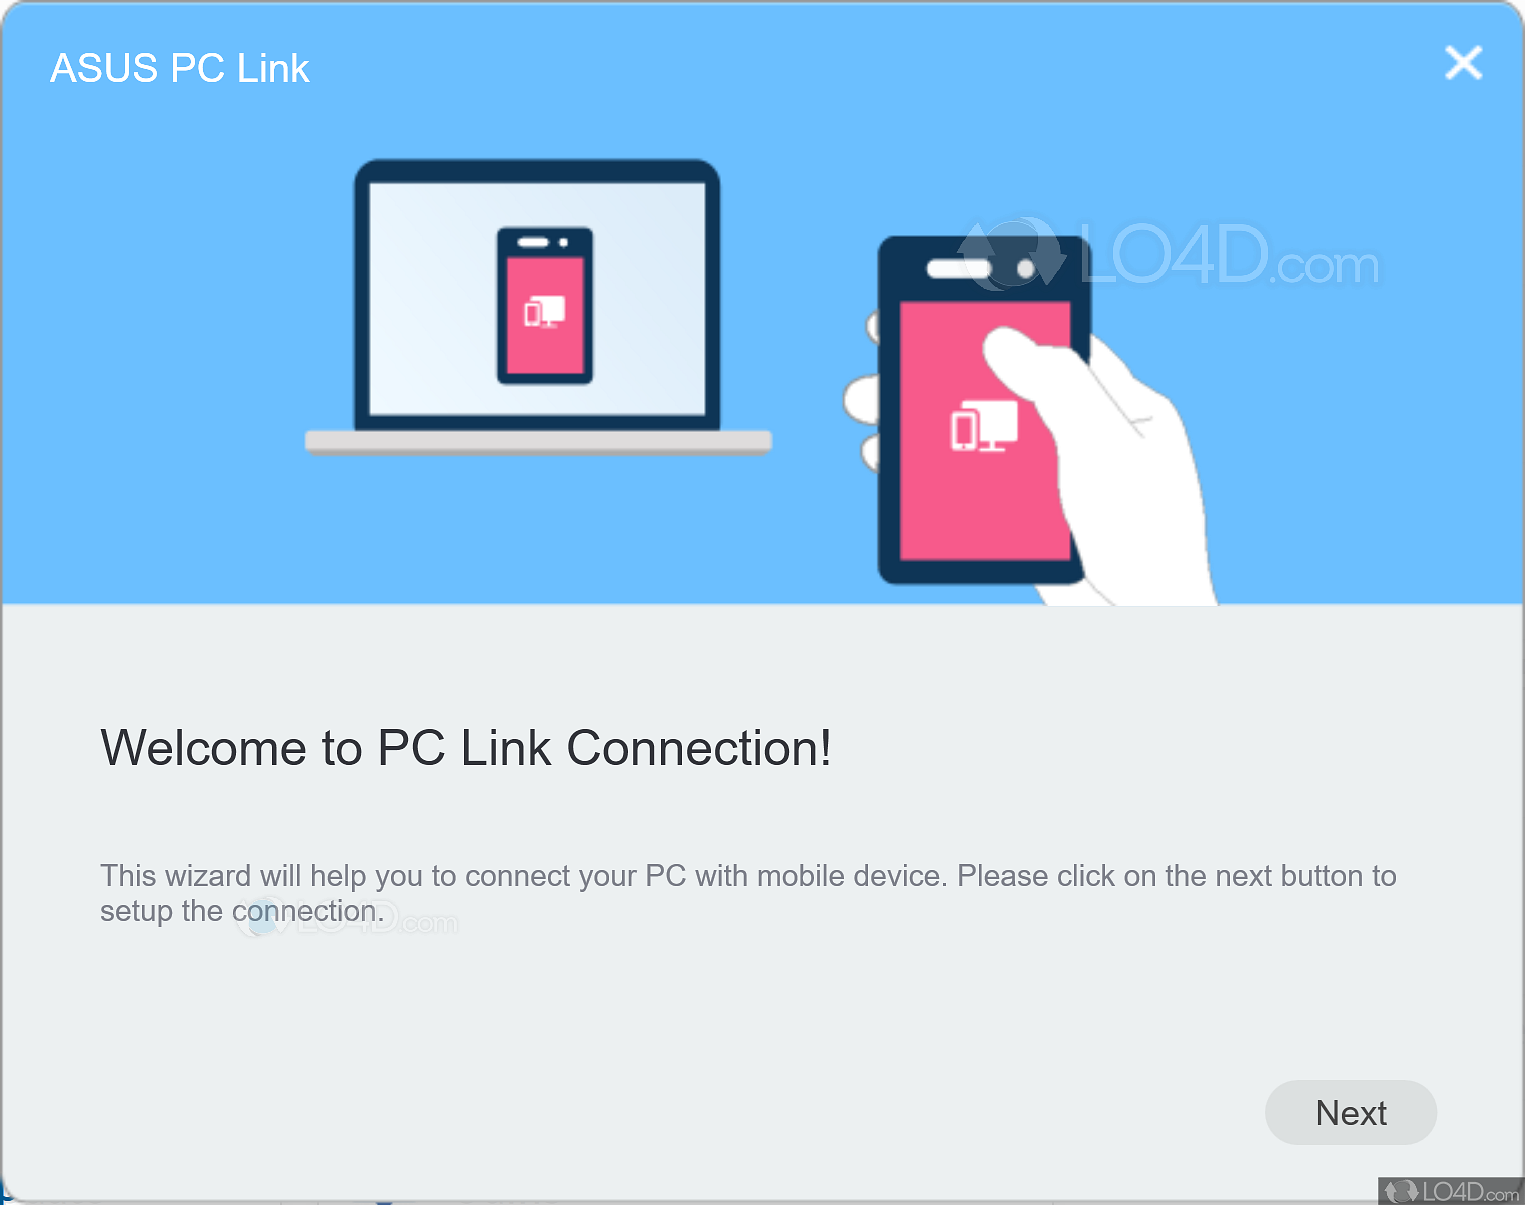 is there a asus pc link app for ipad